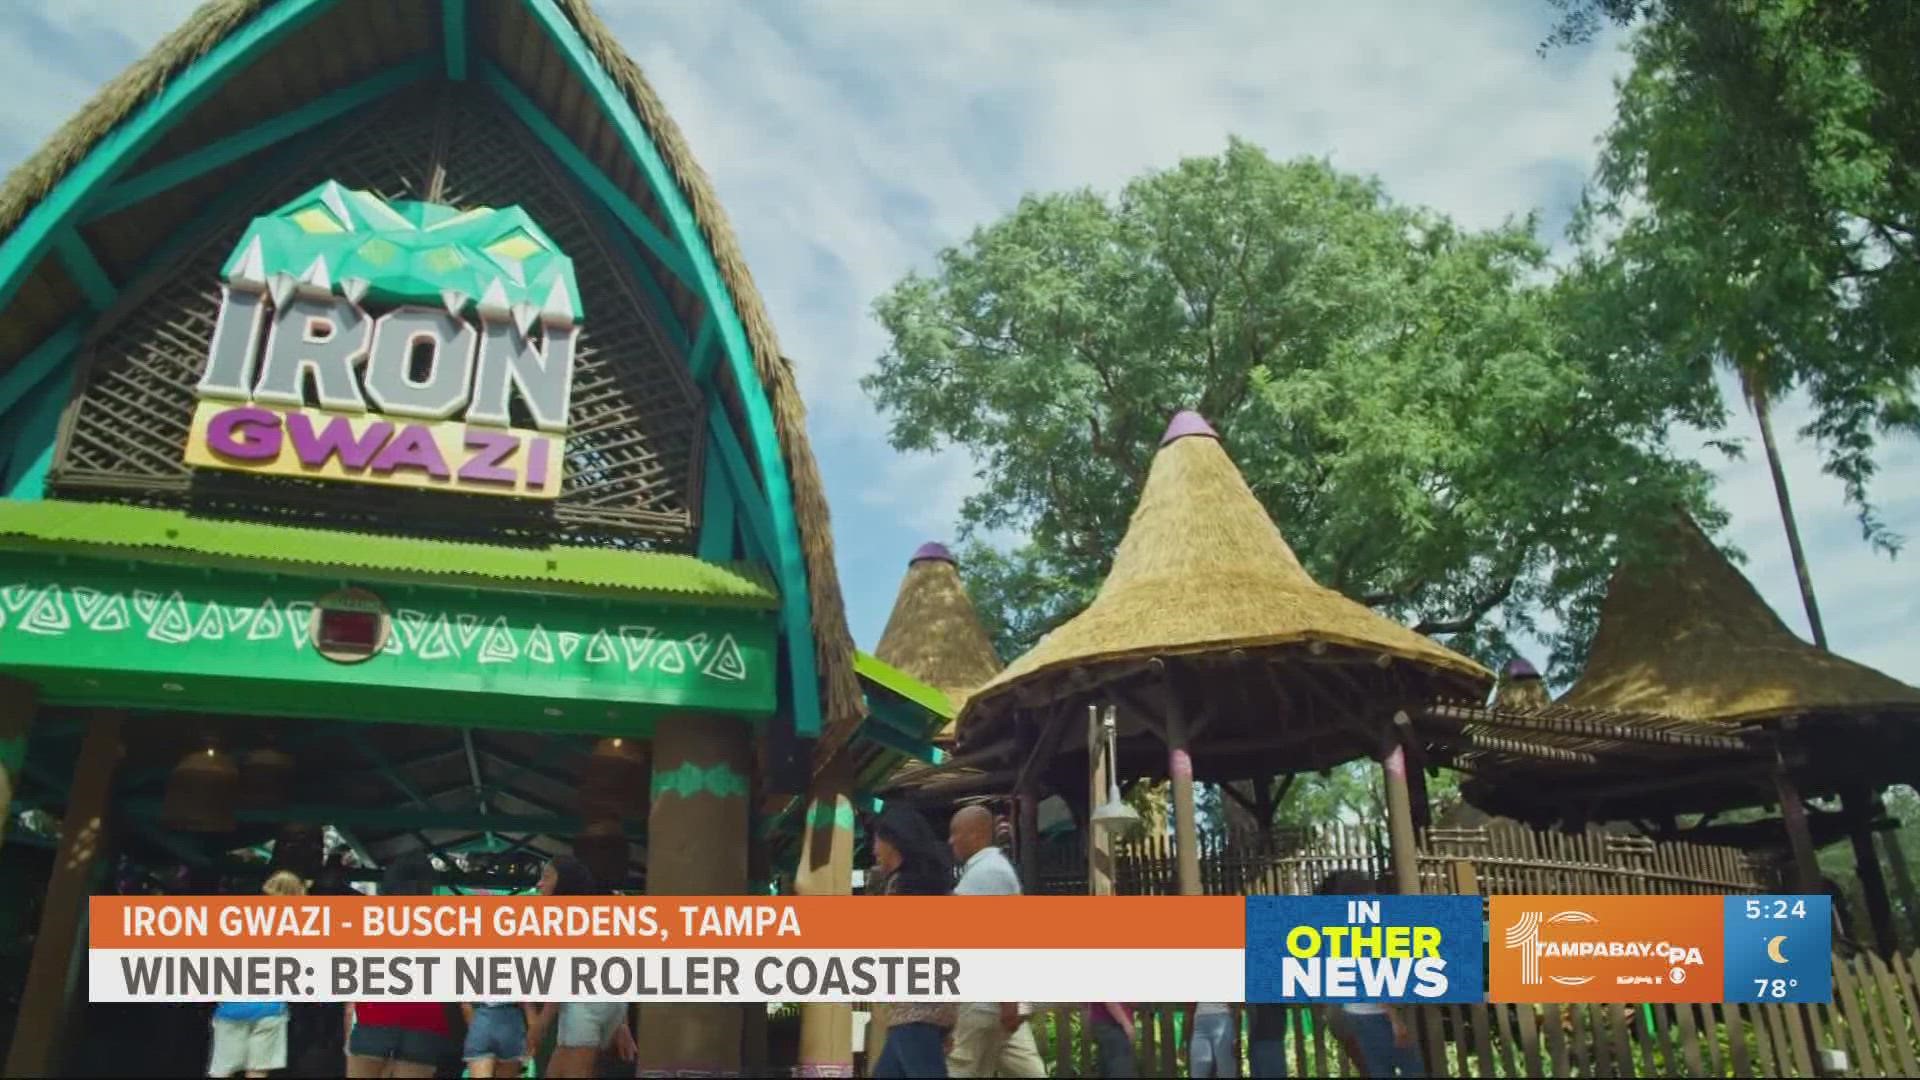 The coaster also ranked in the top five steel roller coasters in the world, the amusement park announced.